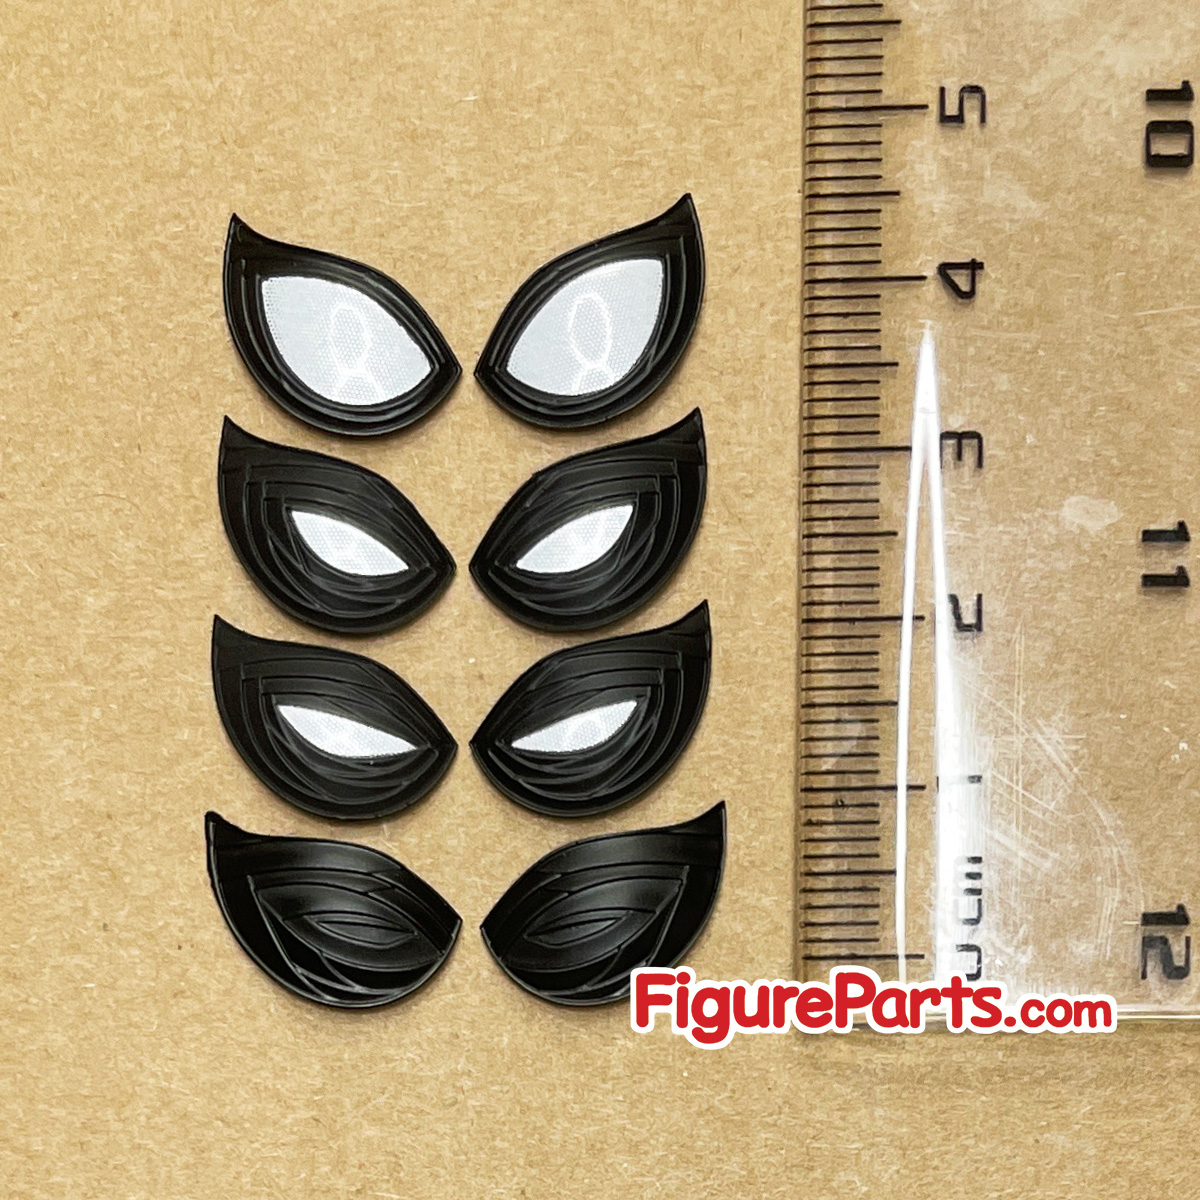 Magnetic Eye Pieces - Hot Toys Spiderman Upgraded Suit Far From Home mms542 1